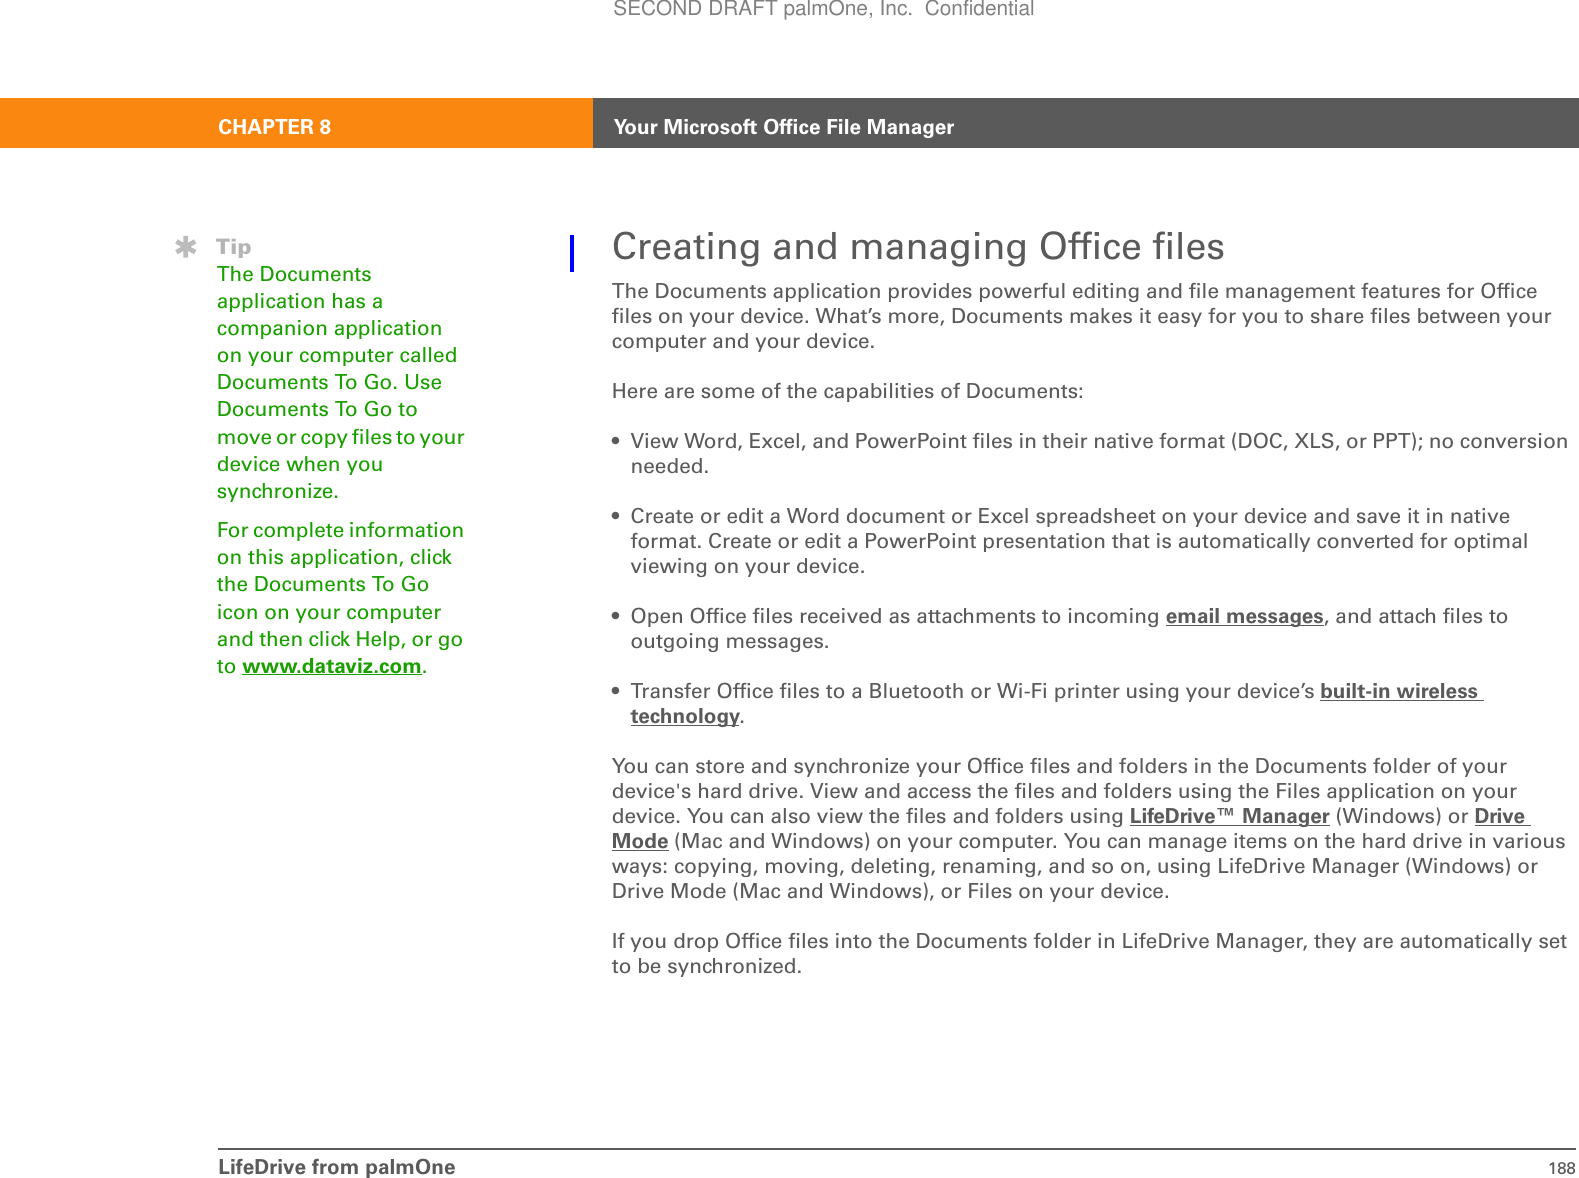 CHAPTER 8 Your Microsoft Office File ManagerLifeDrive from palmOne 188Creating and managing Office filesThe Documents application provides powerful editing and file management features for Office files on your device. What’s more, Documents makes it easy for you to share files between your computer and your device. Here are some of the capabilities of Documents:• View Word, Excel, and PowerPoint files in their native format (DOC, XLS, or PPT); no conversion needed.• Create or edit a Word document or Excel spreadsheet on your device and save it in native format. Create or edit a PowerPoint presentation that is automatically converted for optimal viewing on your device.• Open Office files received as attachments to incoming email messages, and attach files to outgoing messages.• Transfer Office files to a Bluetooth or Wi-Fi printer using your device’s built-in wireless technology.You can store and synchronize your Office files and folders in the Documents folder of your device&apos;s hard drive. View and access the files and folders using the Files application on your device. You can also view the files and folders using LifeDrive™ Manager (Windows) or Drive Mode (Mac and Windows) on your computer. You can manage items on the hard drive in various ways: copying, moving, deleting, renaming, and so on, using LifeDrive Manager (Windows) or Drive Mode (Mac and Windows), or Files on your device. If you drop Office files into the Documents folder in LifeDrive Manager, they are automatically set to be synchronized.TipThe Documents application has a companion application on your computer called Documents To Go. Use Documents To Go to move or copy files to your device when you synchronize.For complete information on this application, click the Documents To Go icon on your computer and then click Help, or go to www.dataviz.com.SECOND DRAFT palmOne, Inc.  Confidential